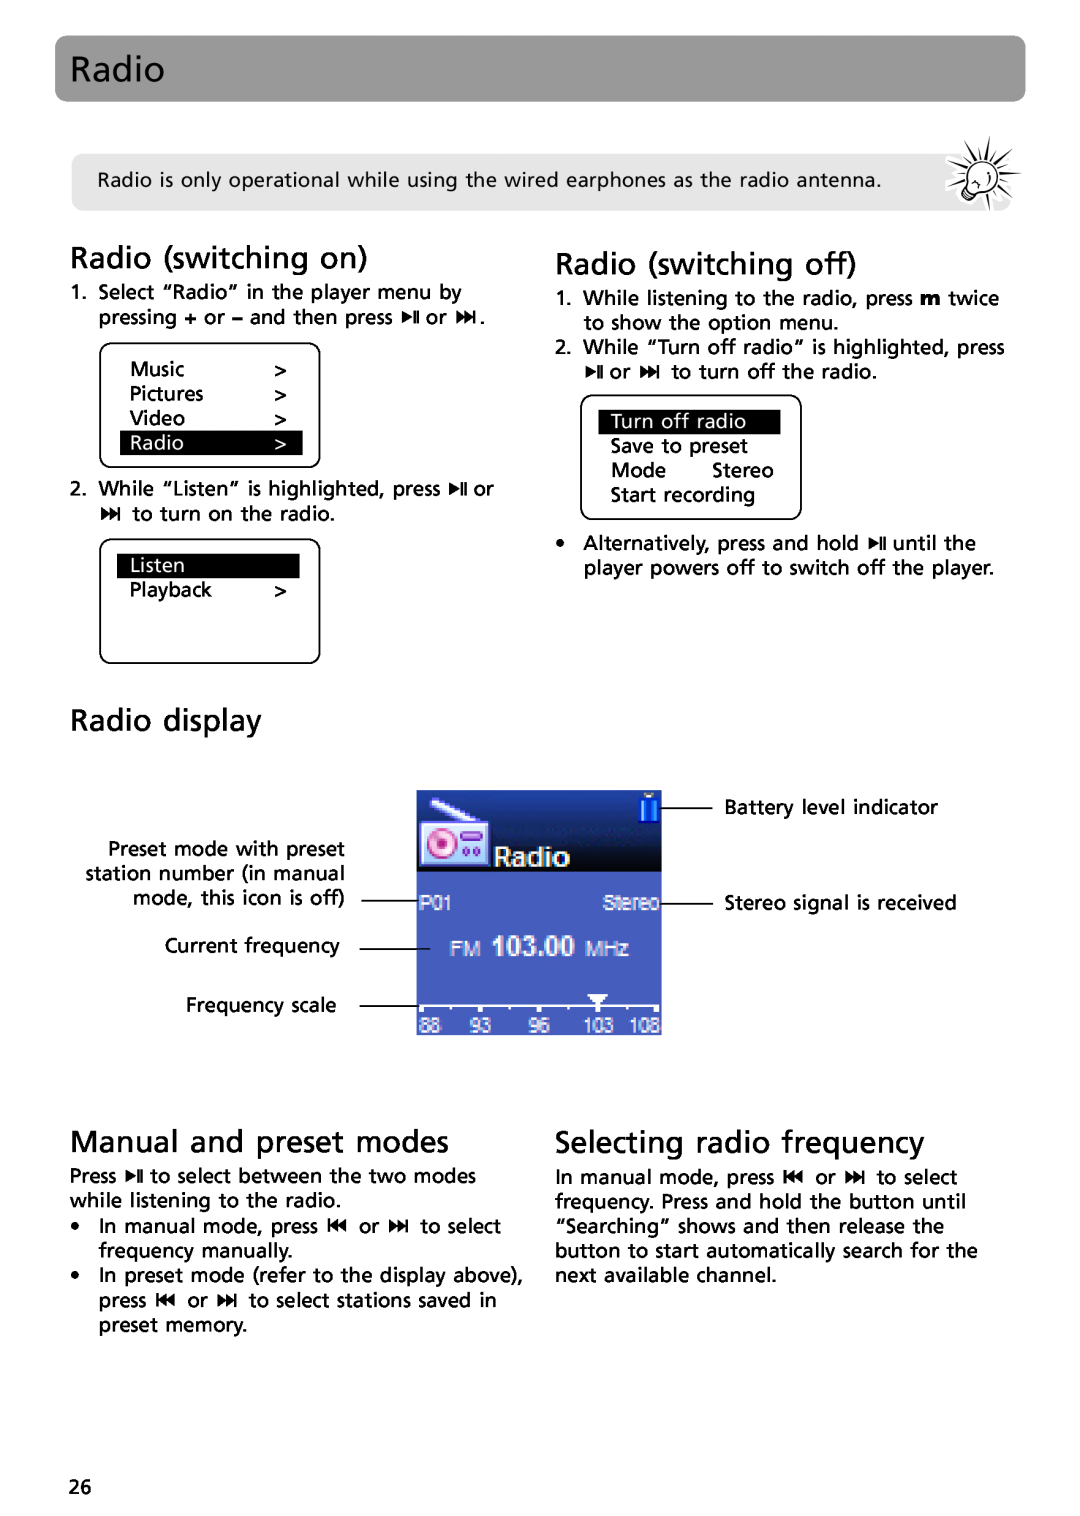 RCA S2502 Radio switching on, Radio switching off, Radio display, Manual and preset modes, Selecting radio frequency 